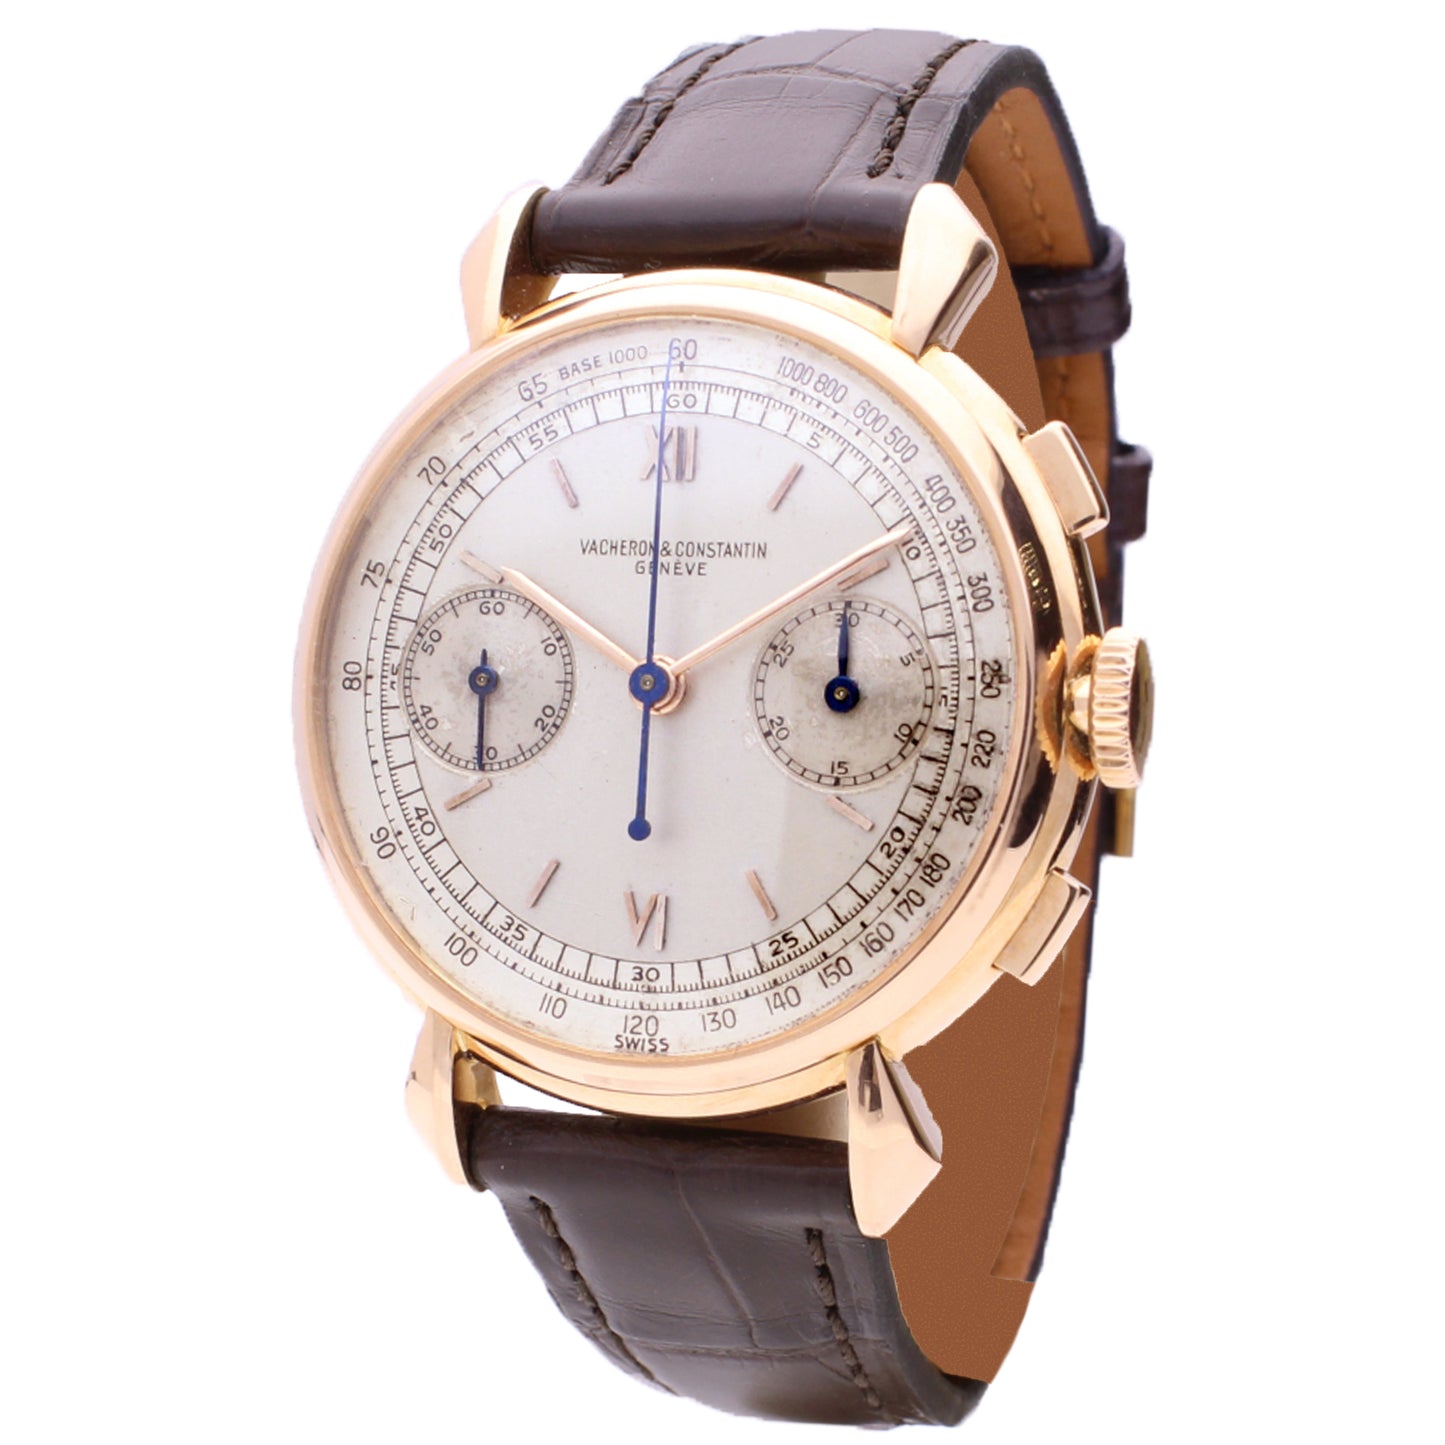 18ct rose gold Vacheron & Constantin, reference 4178 chronograph wristwatch. Made 1950